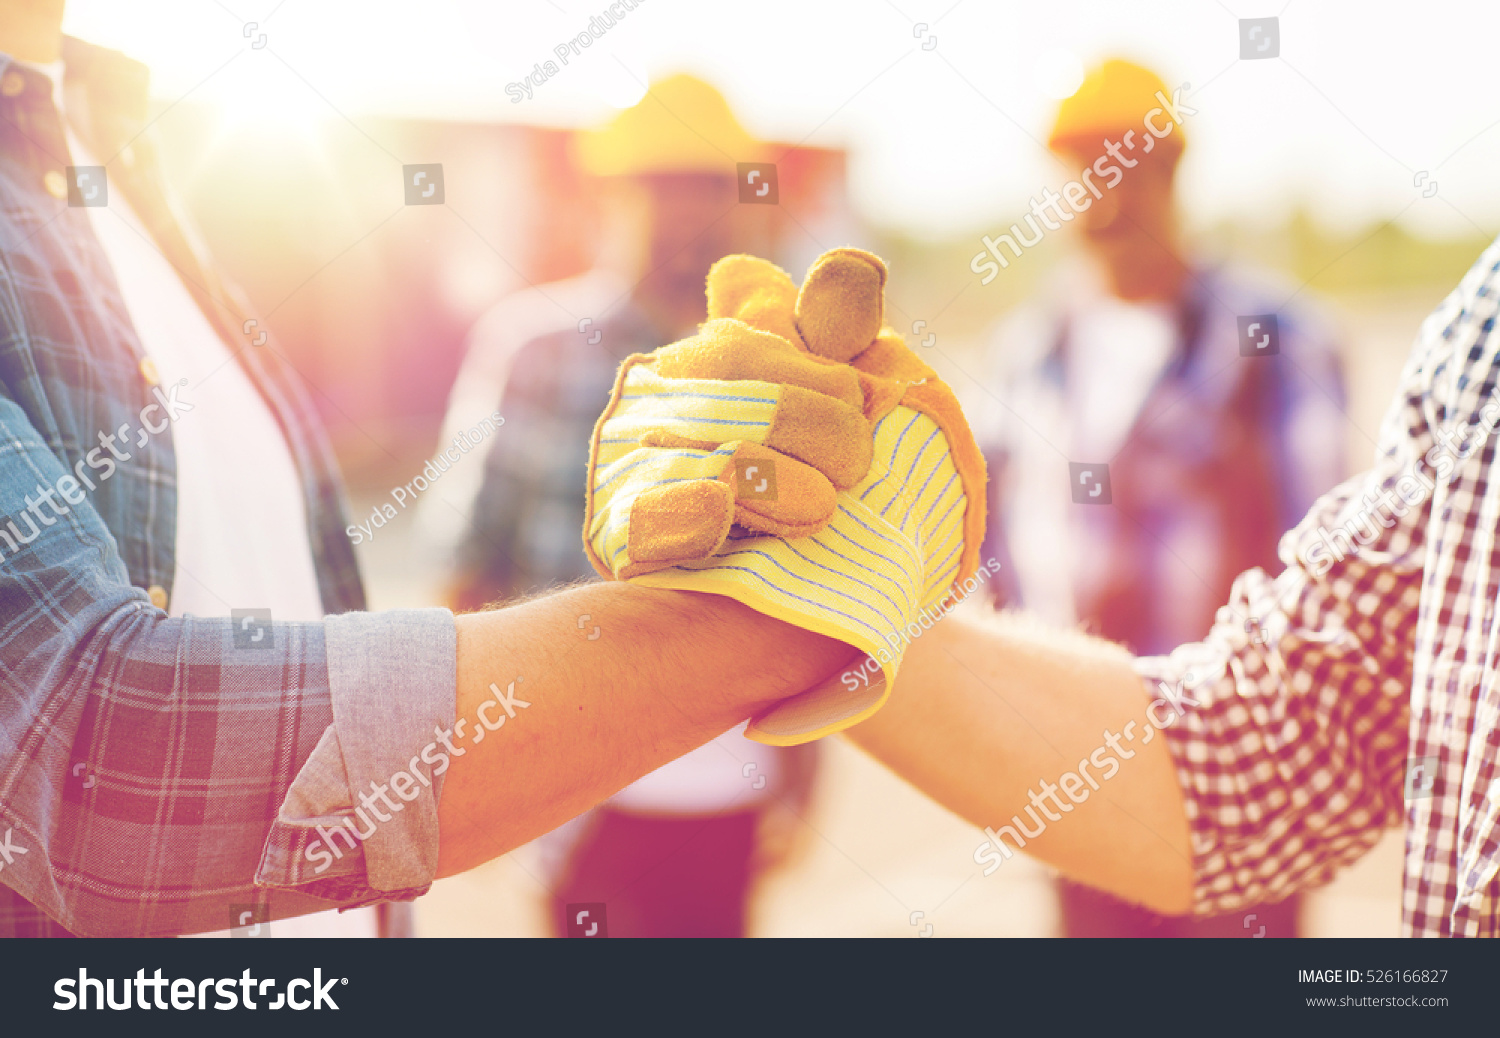 building, teamwork, partnership, gesture and people concept - close up of builders hands in gloves greeting each other with handshake on construction site #526166827